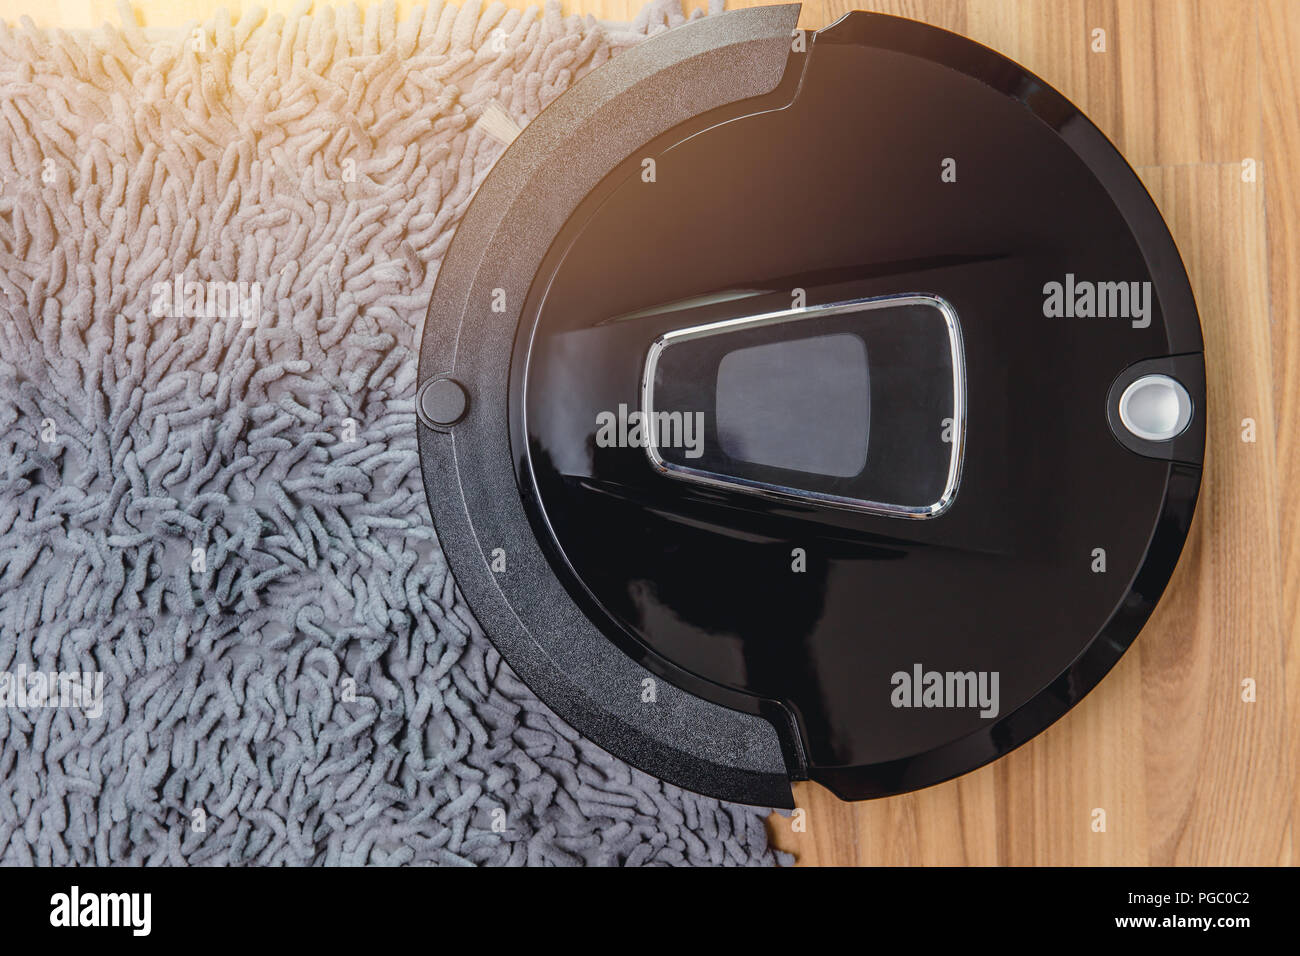 Automate Robot Vacuum Cleaner On Laminate Wood Floor With Carpet